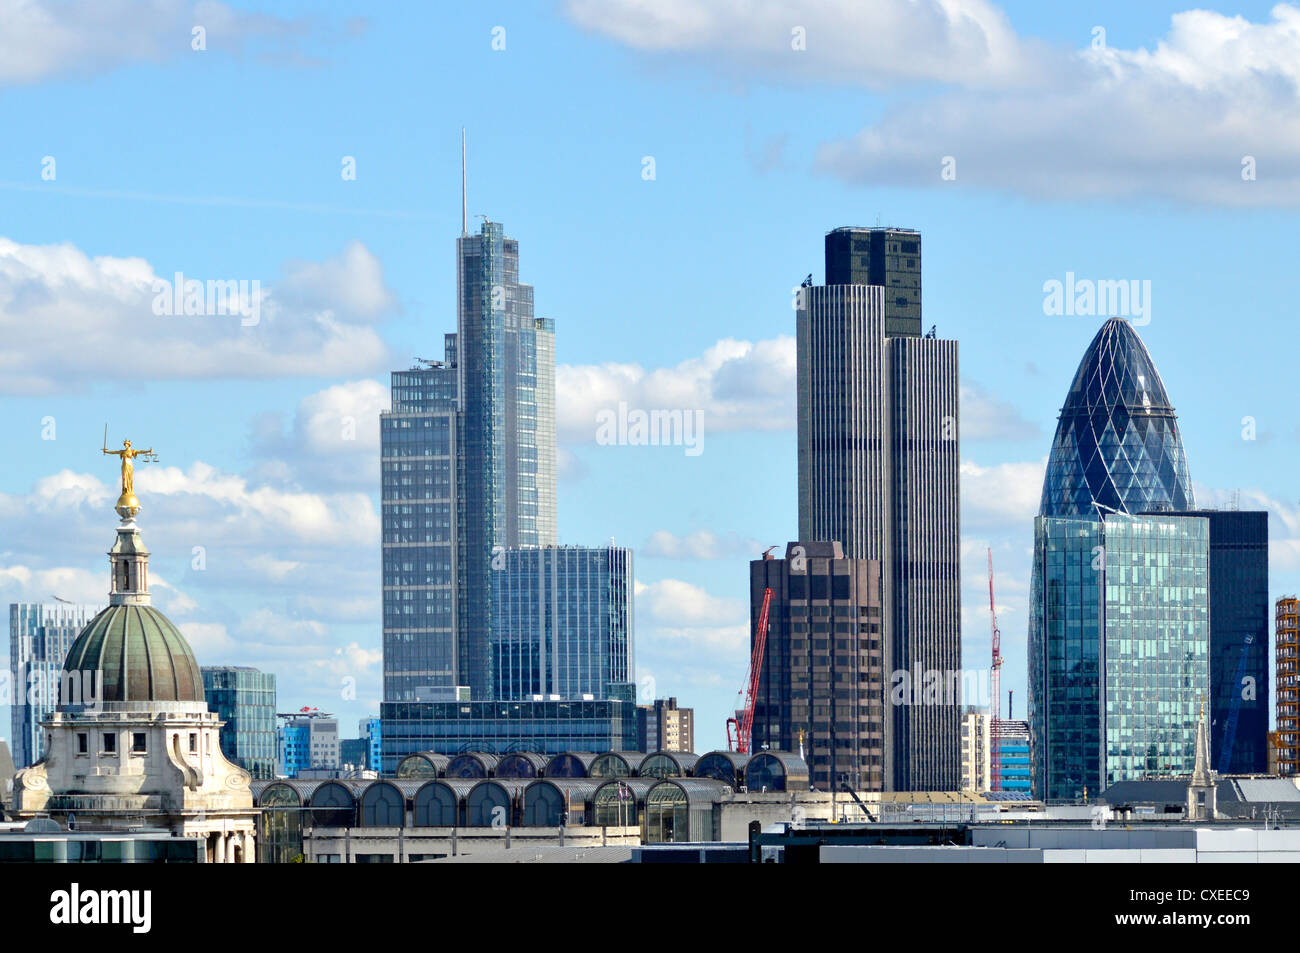 City of London ancient and modern buildings on urban landscape skyline including Old Bailey Heron Tower, Tower 42, and the Gherkin England UK Stock Photo